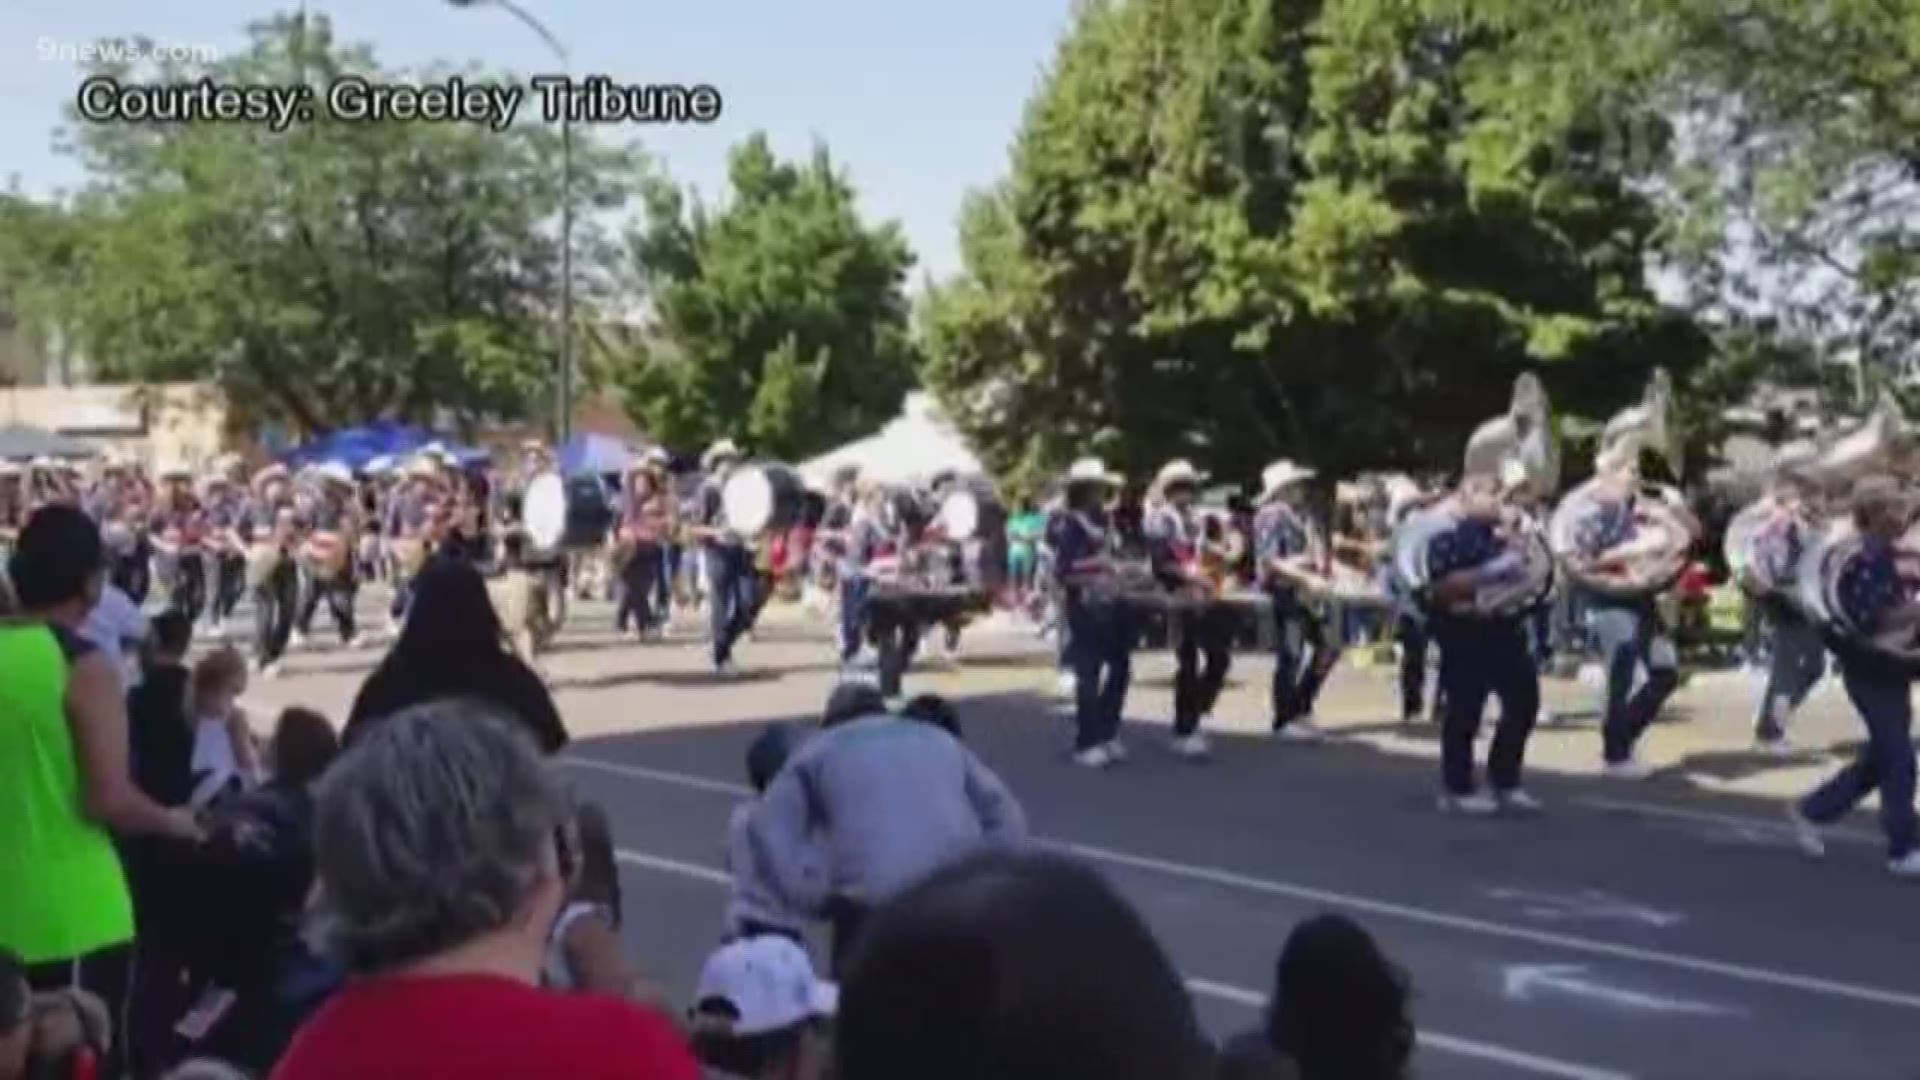 The Greeley Stampede 4th of July Parade features over 130 floats, marching bands and equestrians from around the state.